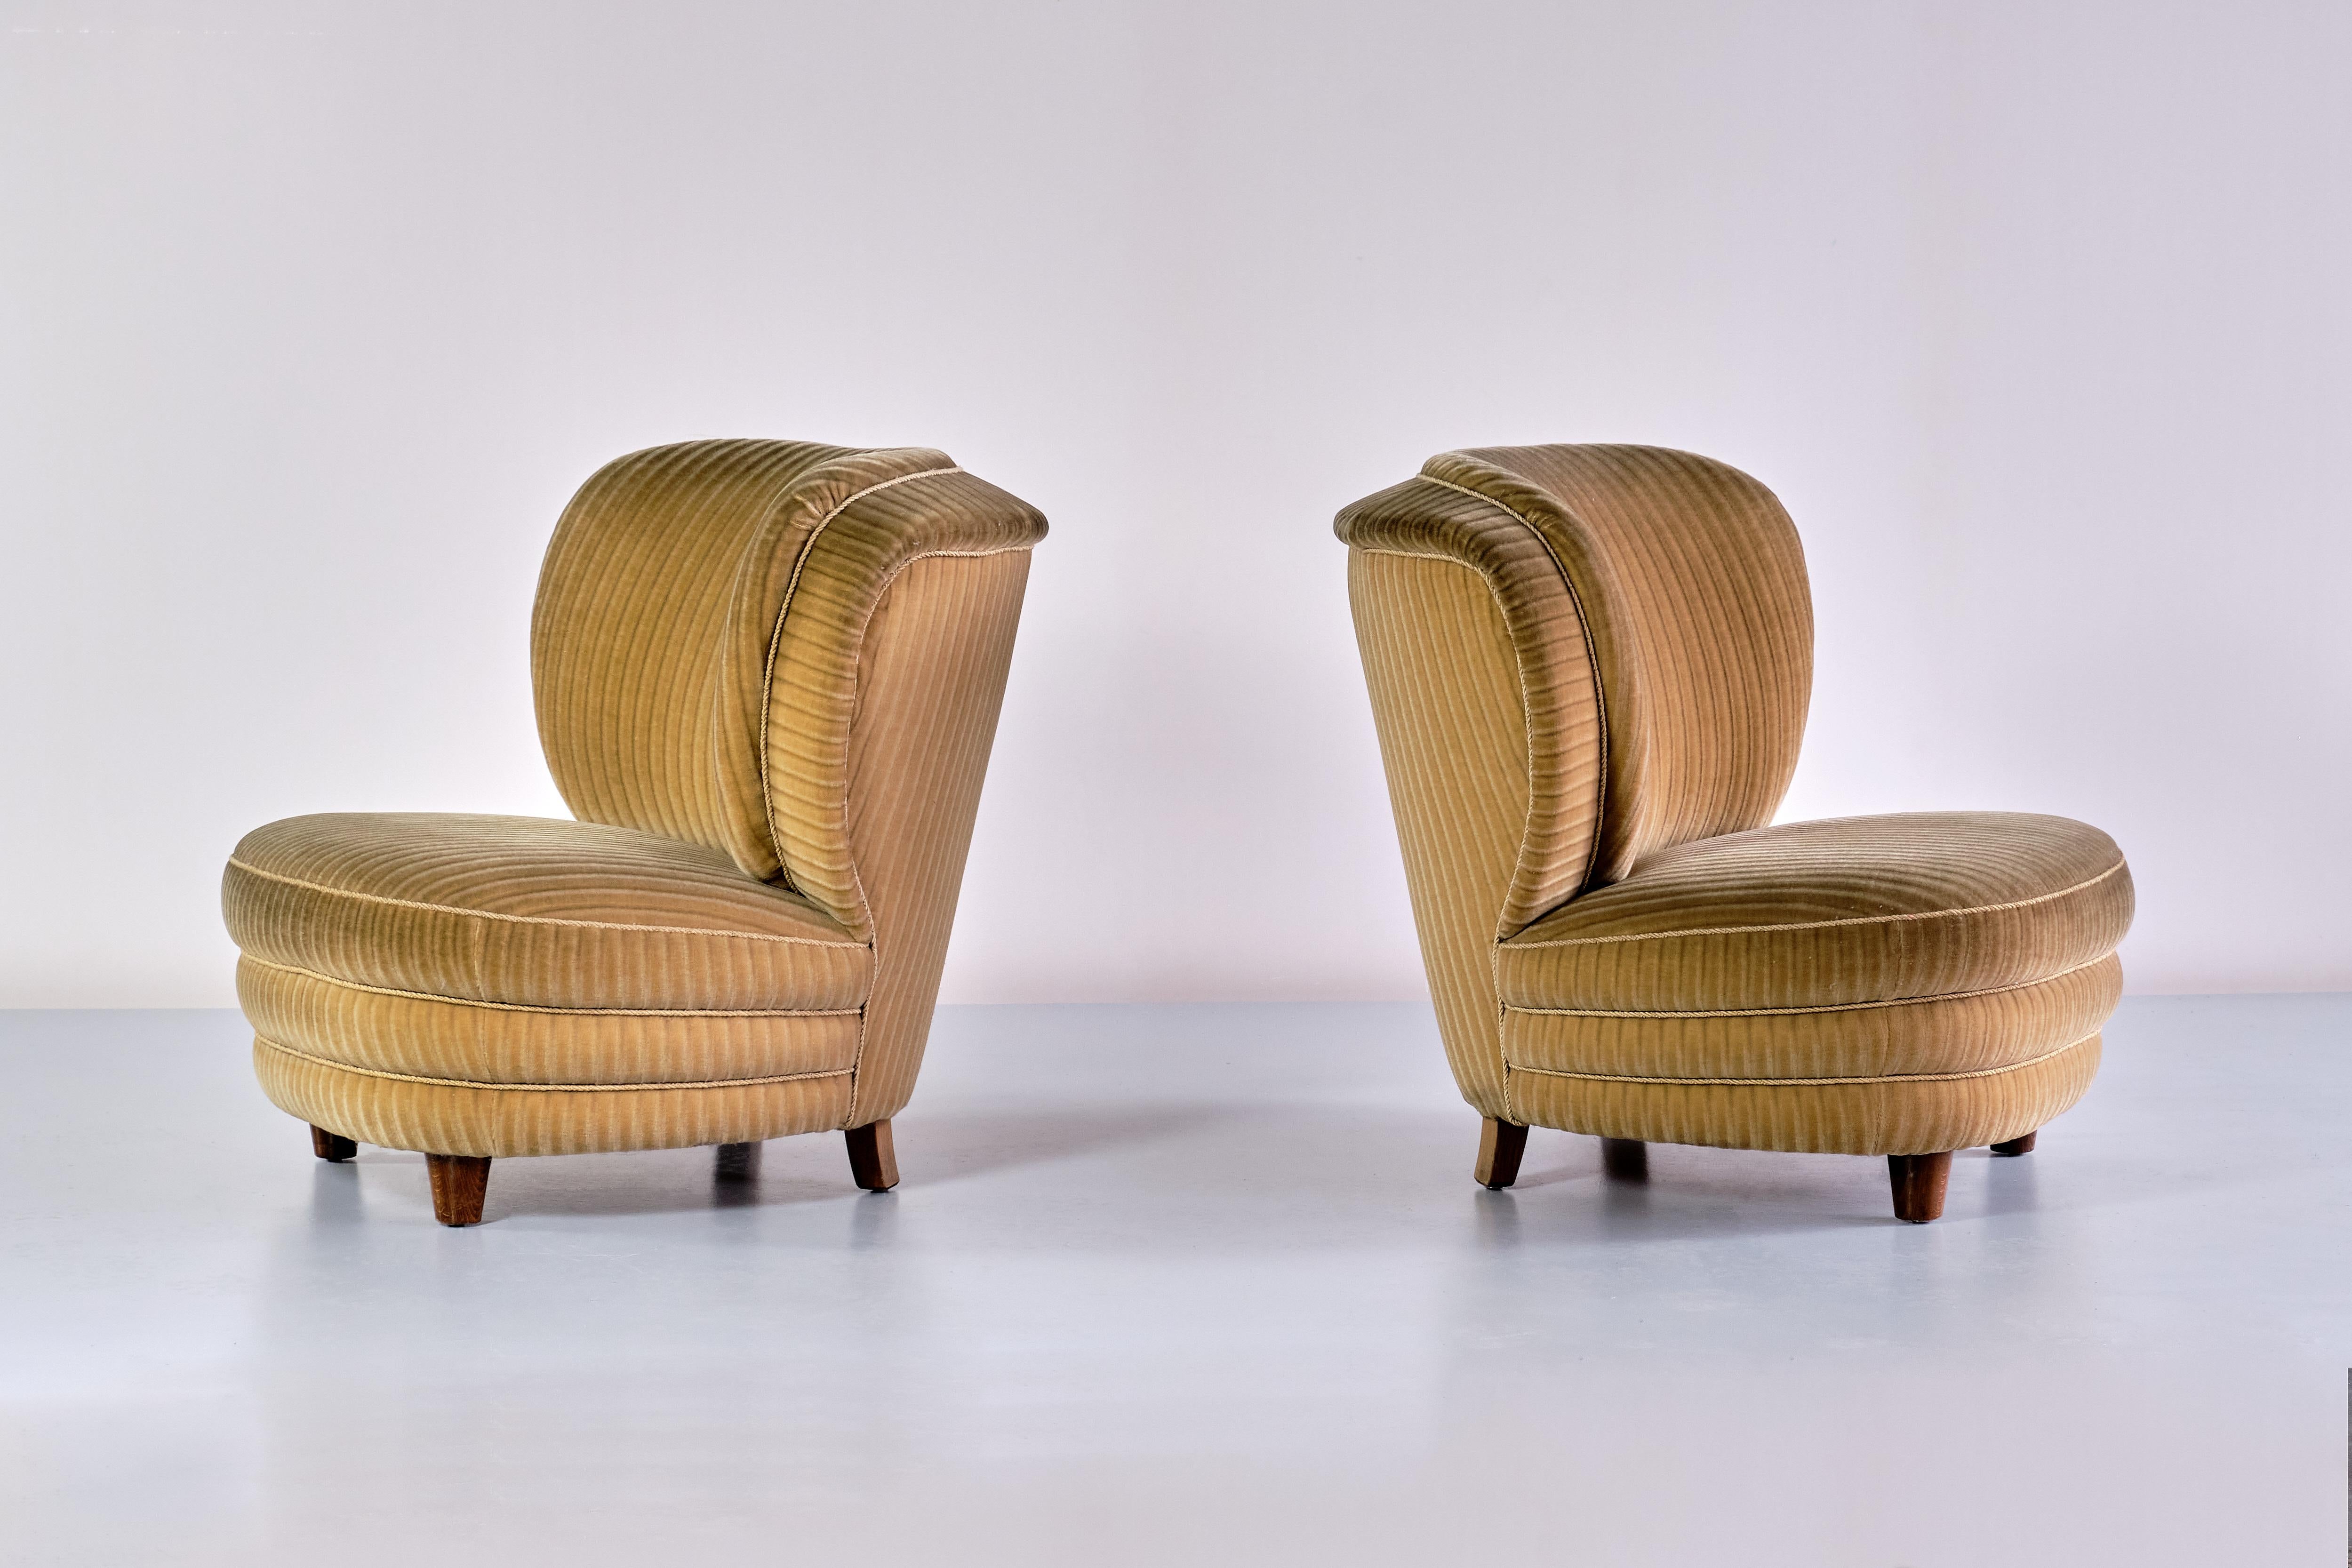 This pair of lounge chairs was designed by Adolf Wrenger and produced by his company in Lippe, Germany in the early 1950s. The curved shape and the round lines of both the backrest and seat give the chairs a striking and elegant feel. The seat